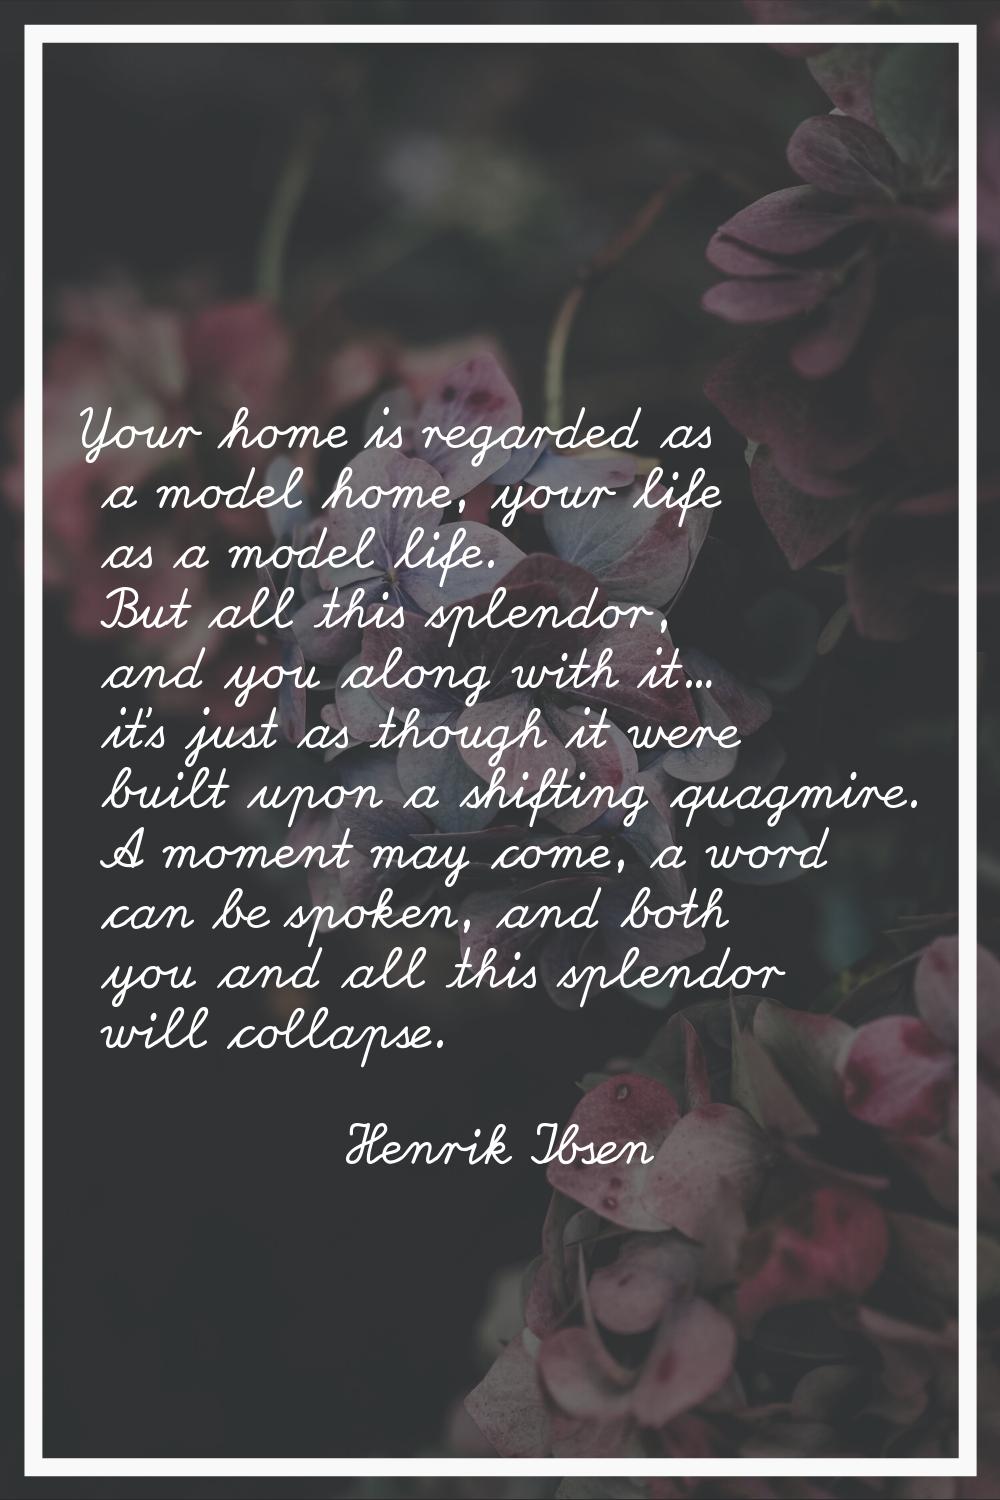 Your home is regarded as a model home, your life as a model life. But all this splendor, and you al